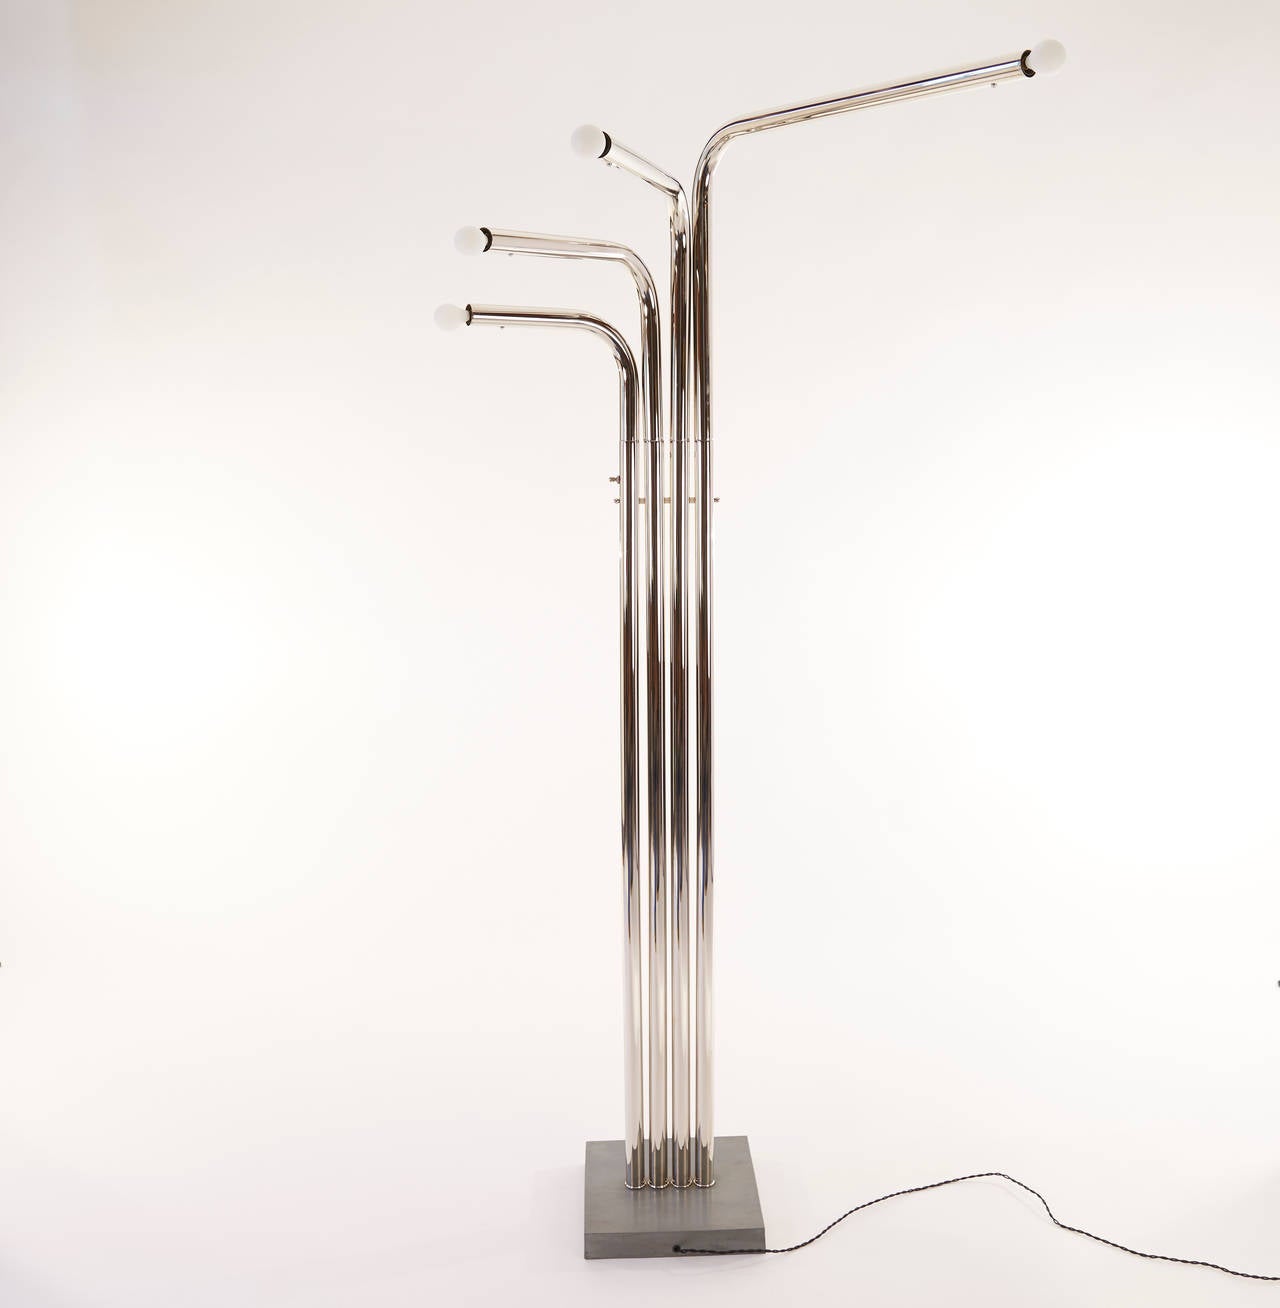 A sculptural lamp with articulated arms that can be arranged creating a playful effect.